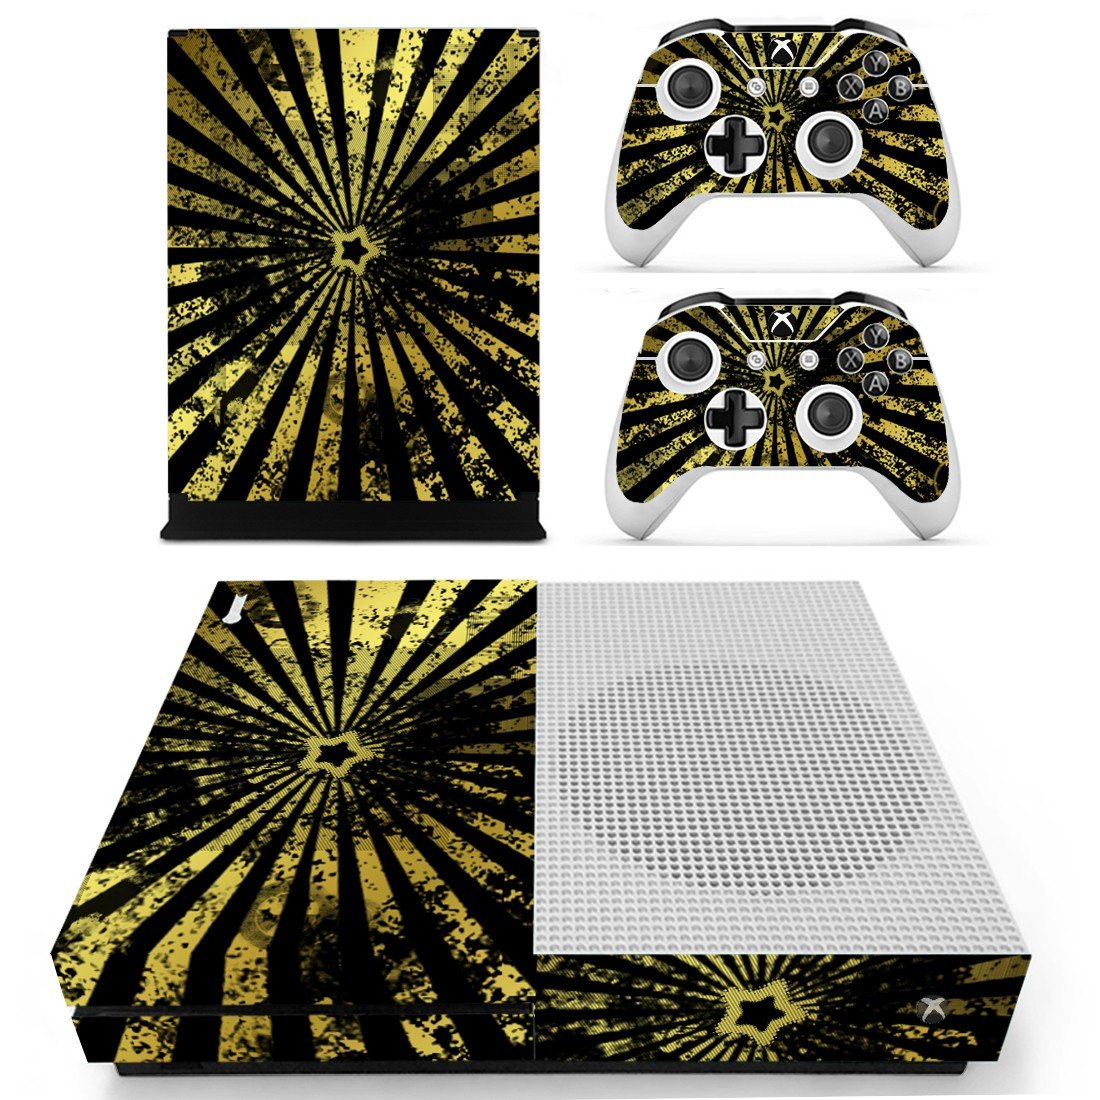 Pentagram Cover For Xbox One S